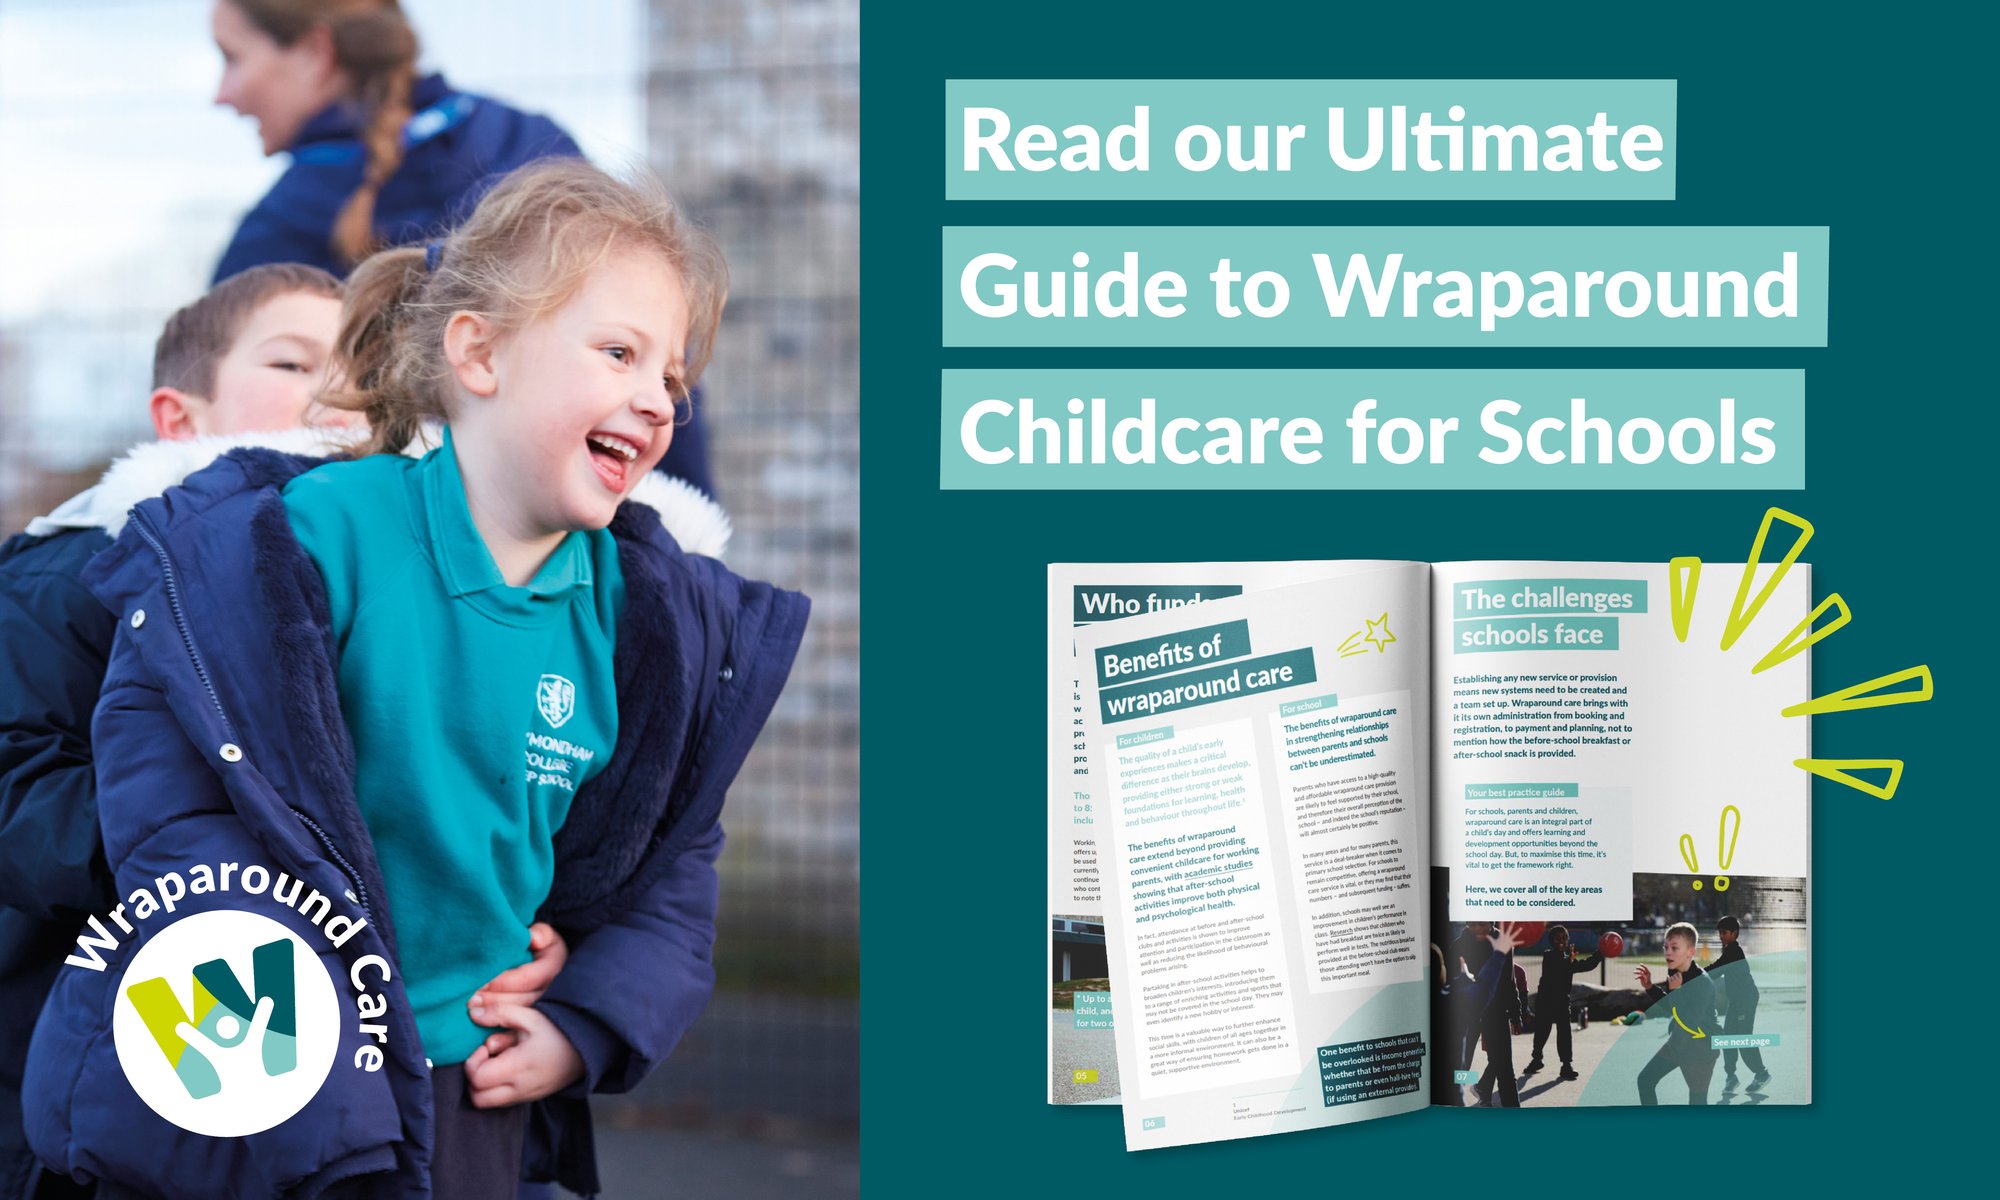 Read our Ultimate Guide to Wraparound Childcare for Schools